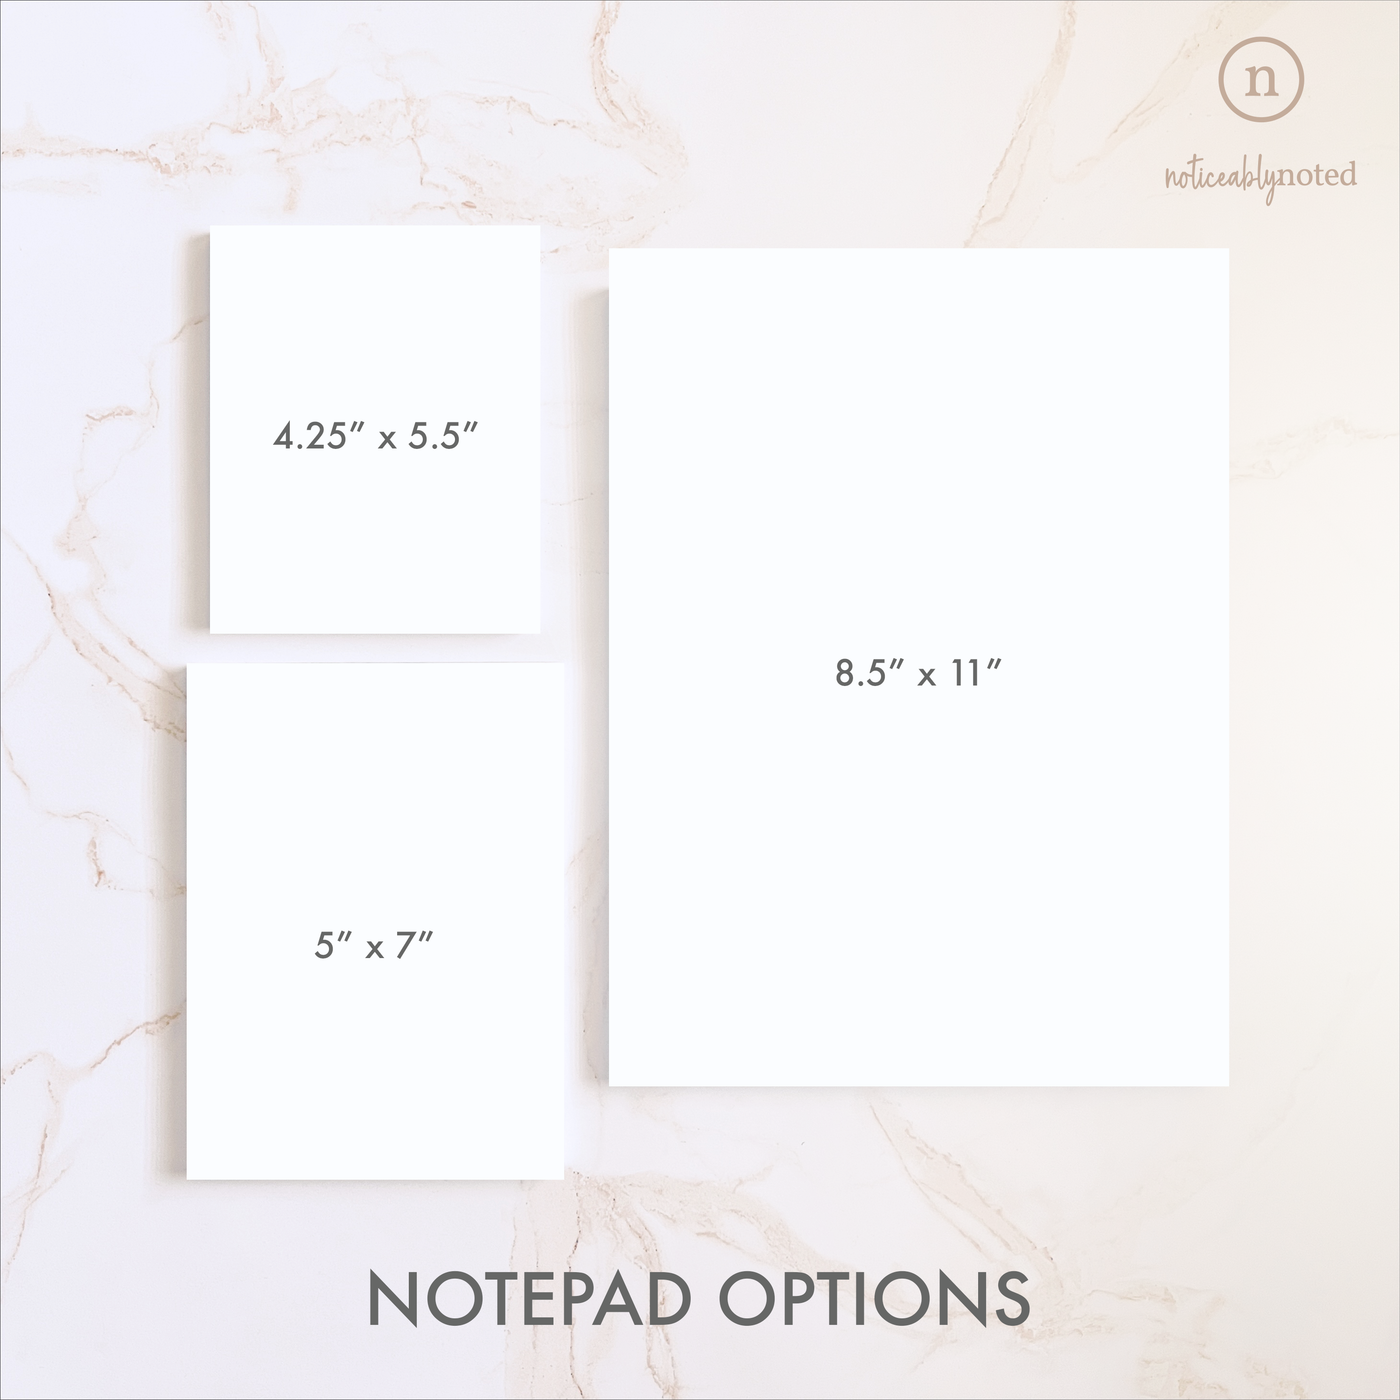 Notepad Sized Comparison | Noticeably Noted